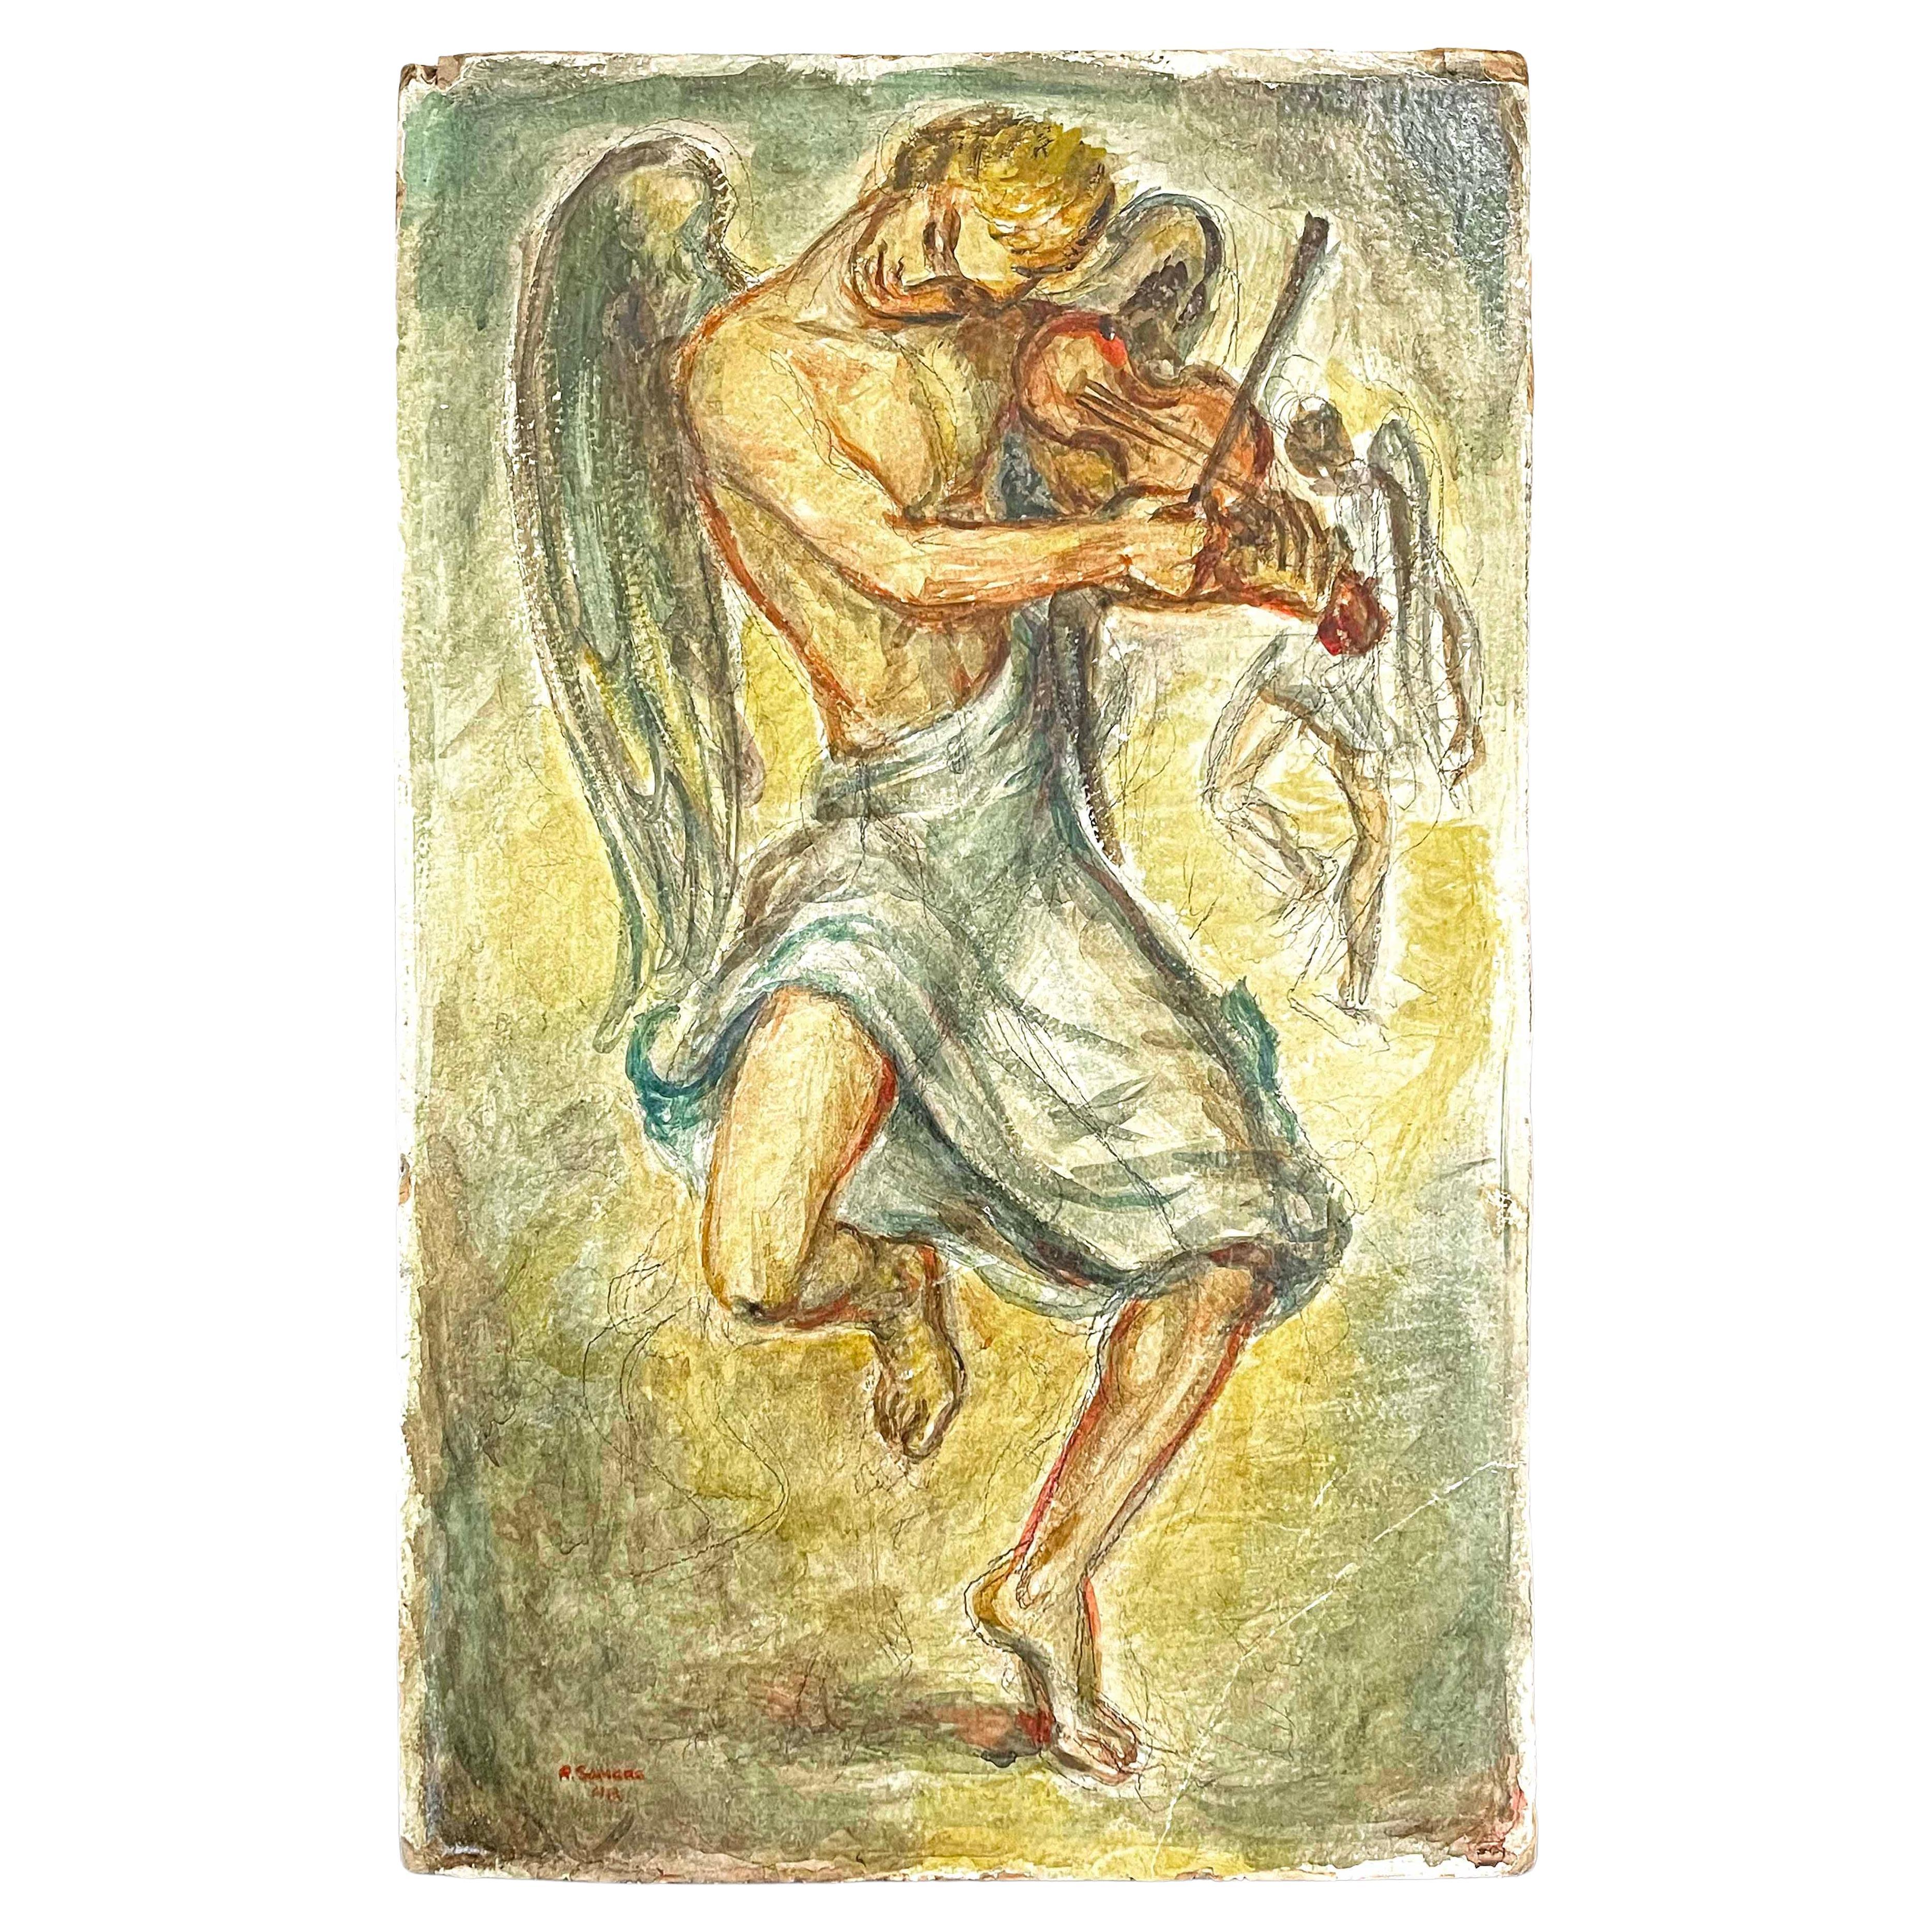 "Dancing Angel", Classic 1940s Tempera Painting with Nude Male Figure